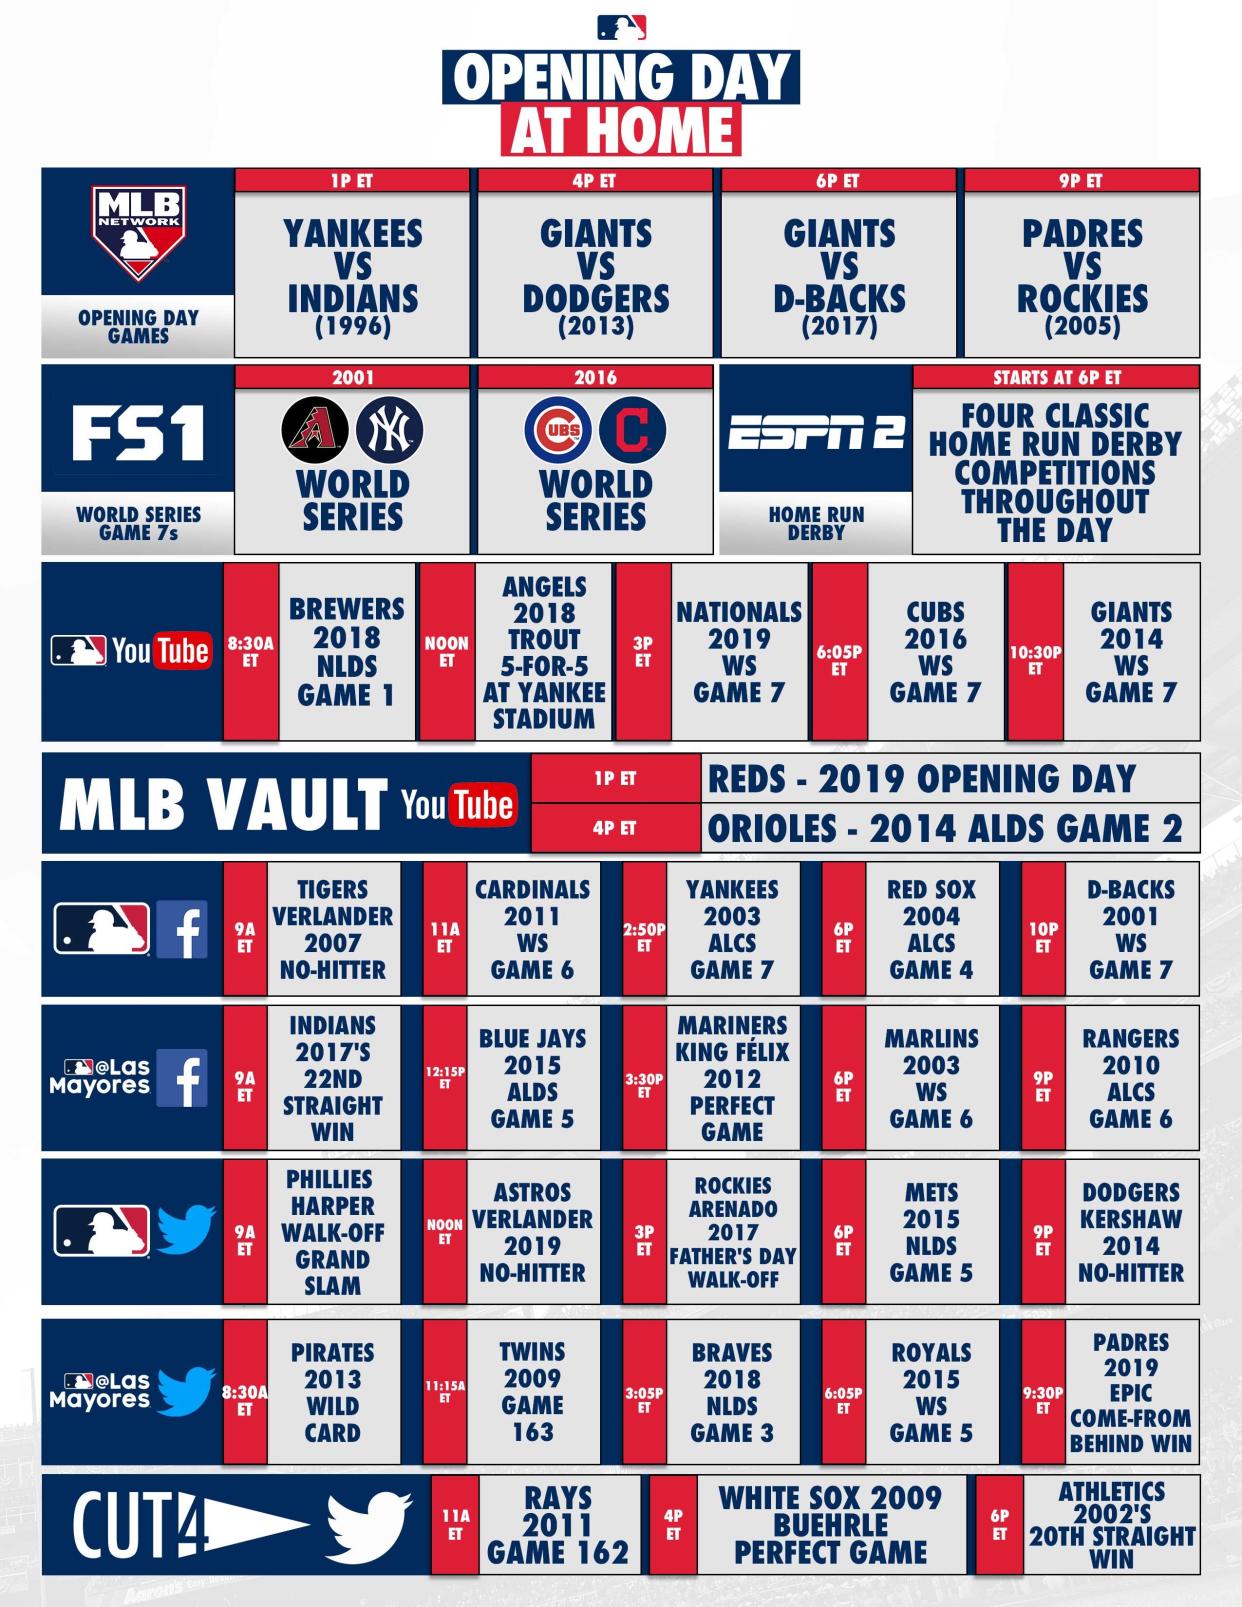 The full schedule of events. (Image via MLB)